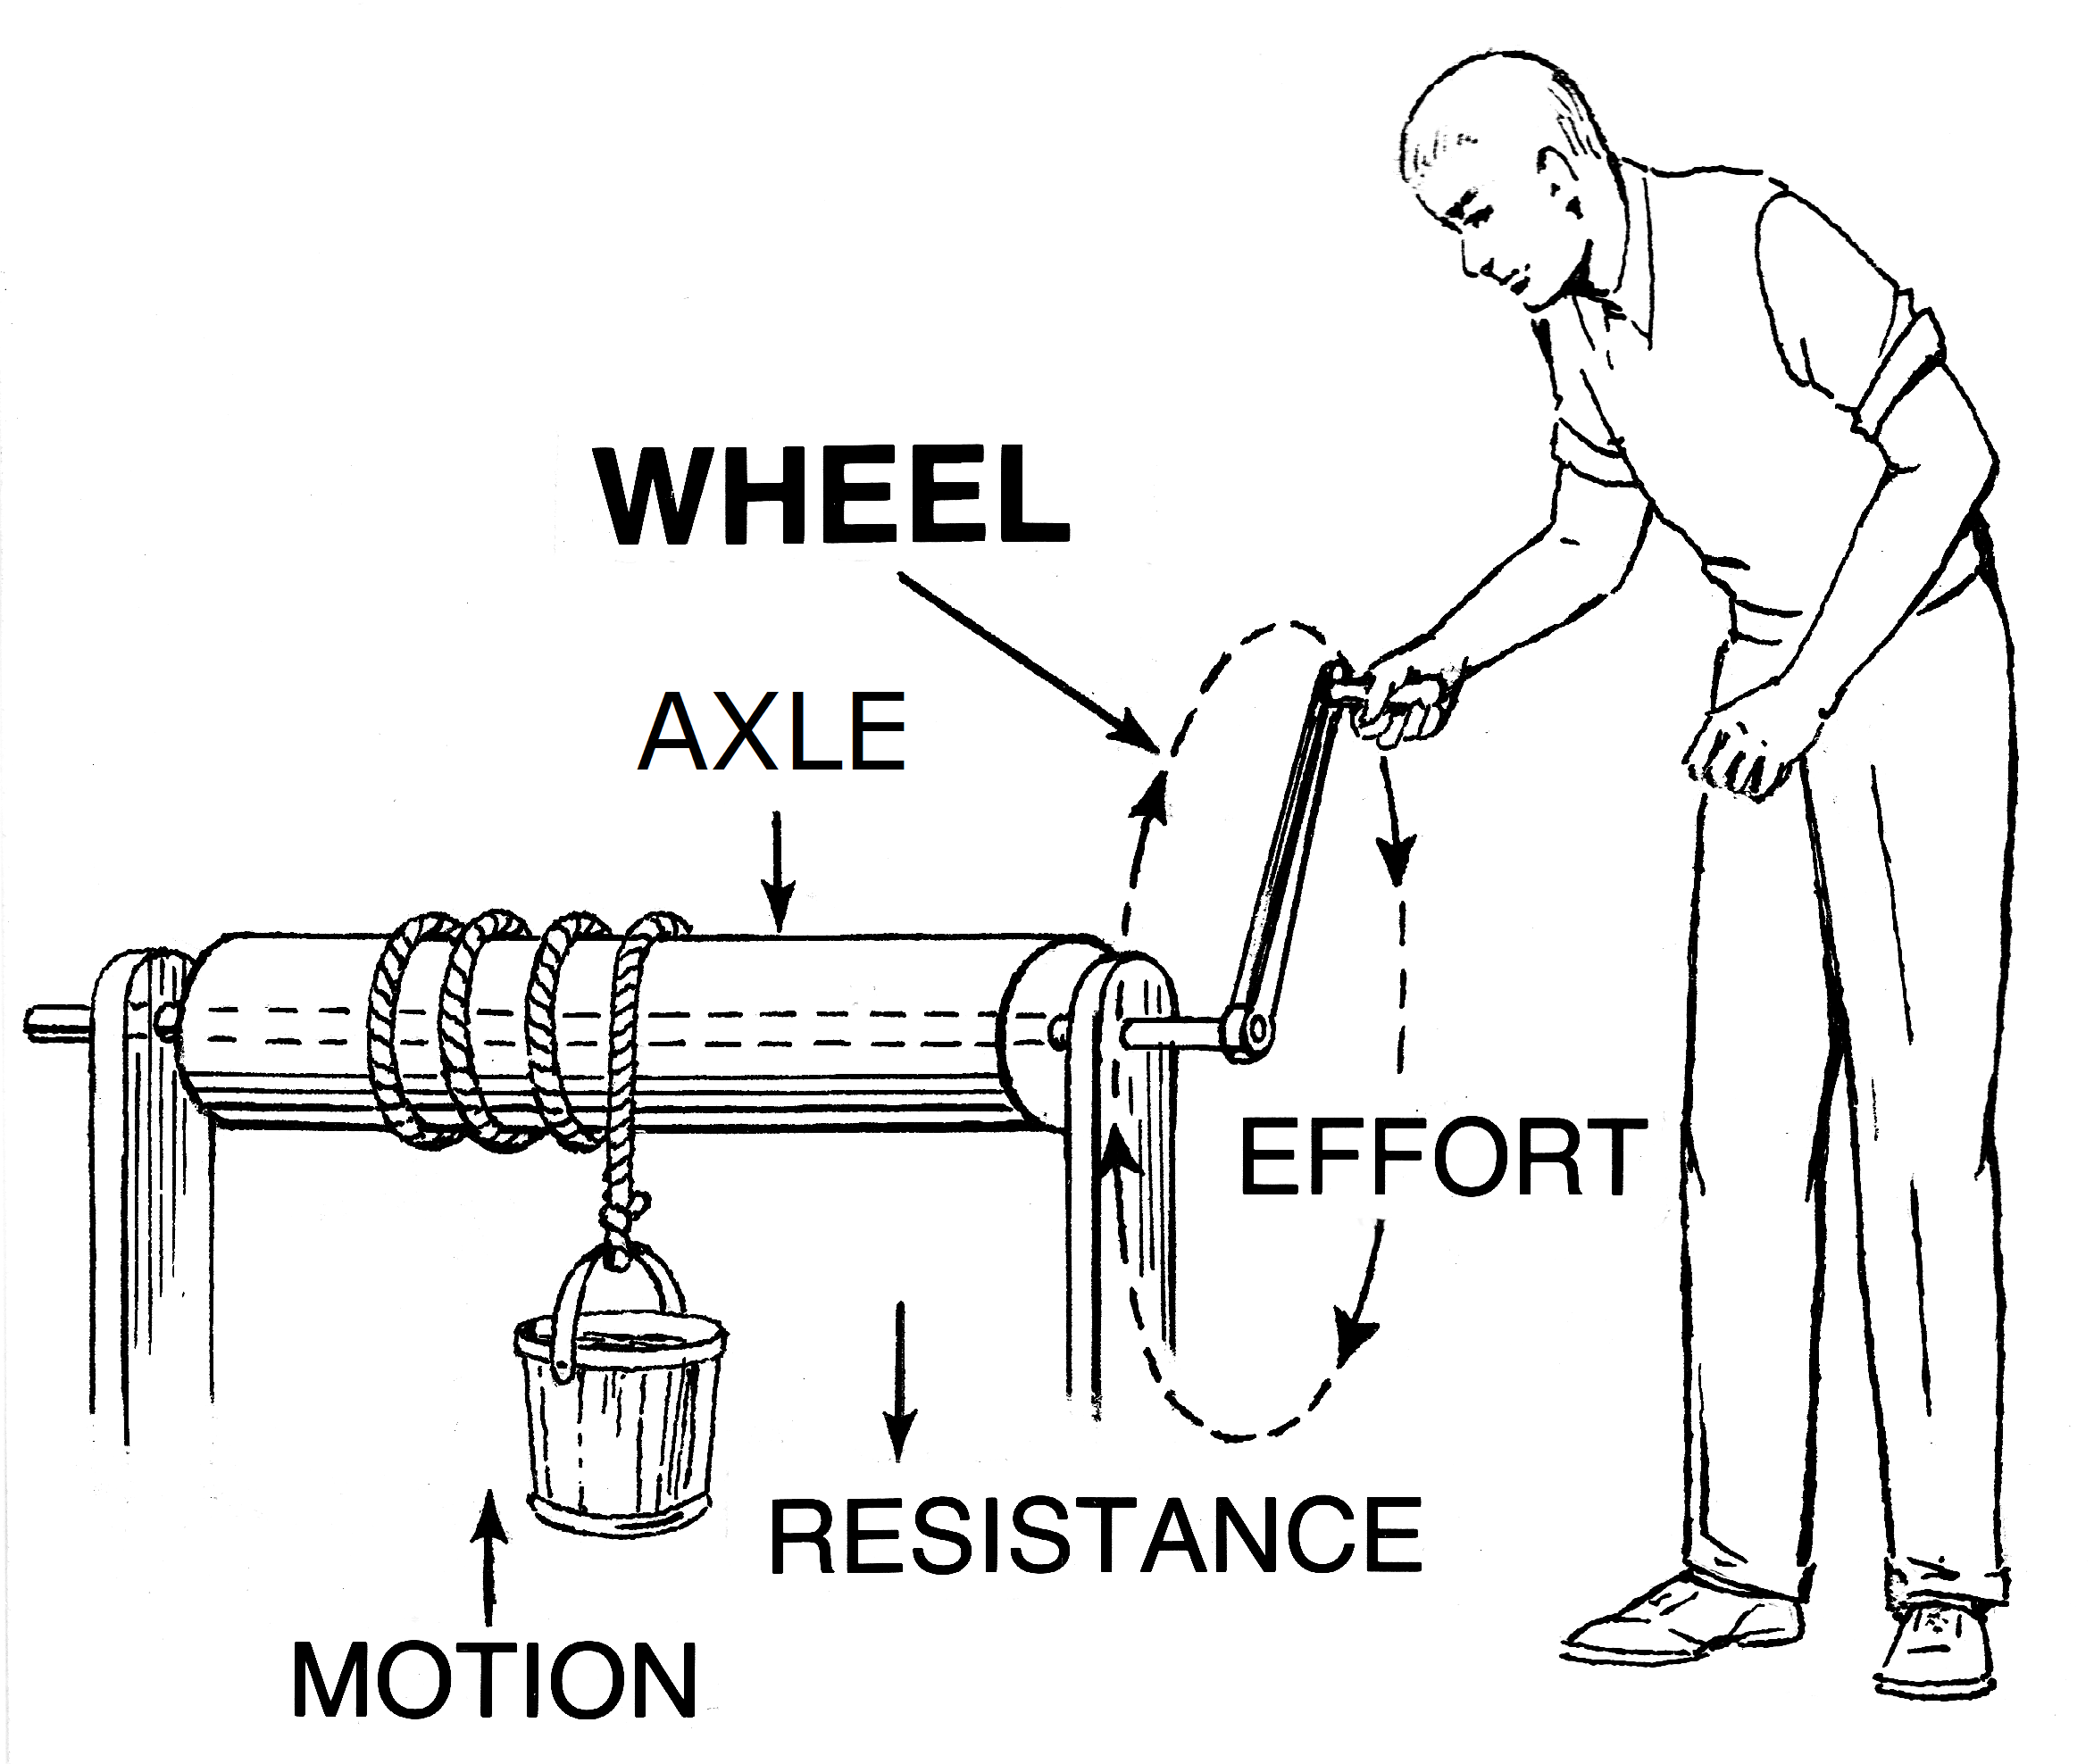 WBBSE Notes For Class 6 General Science And Environment Chapter 9 Common Machines Wheel and Axle .